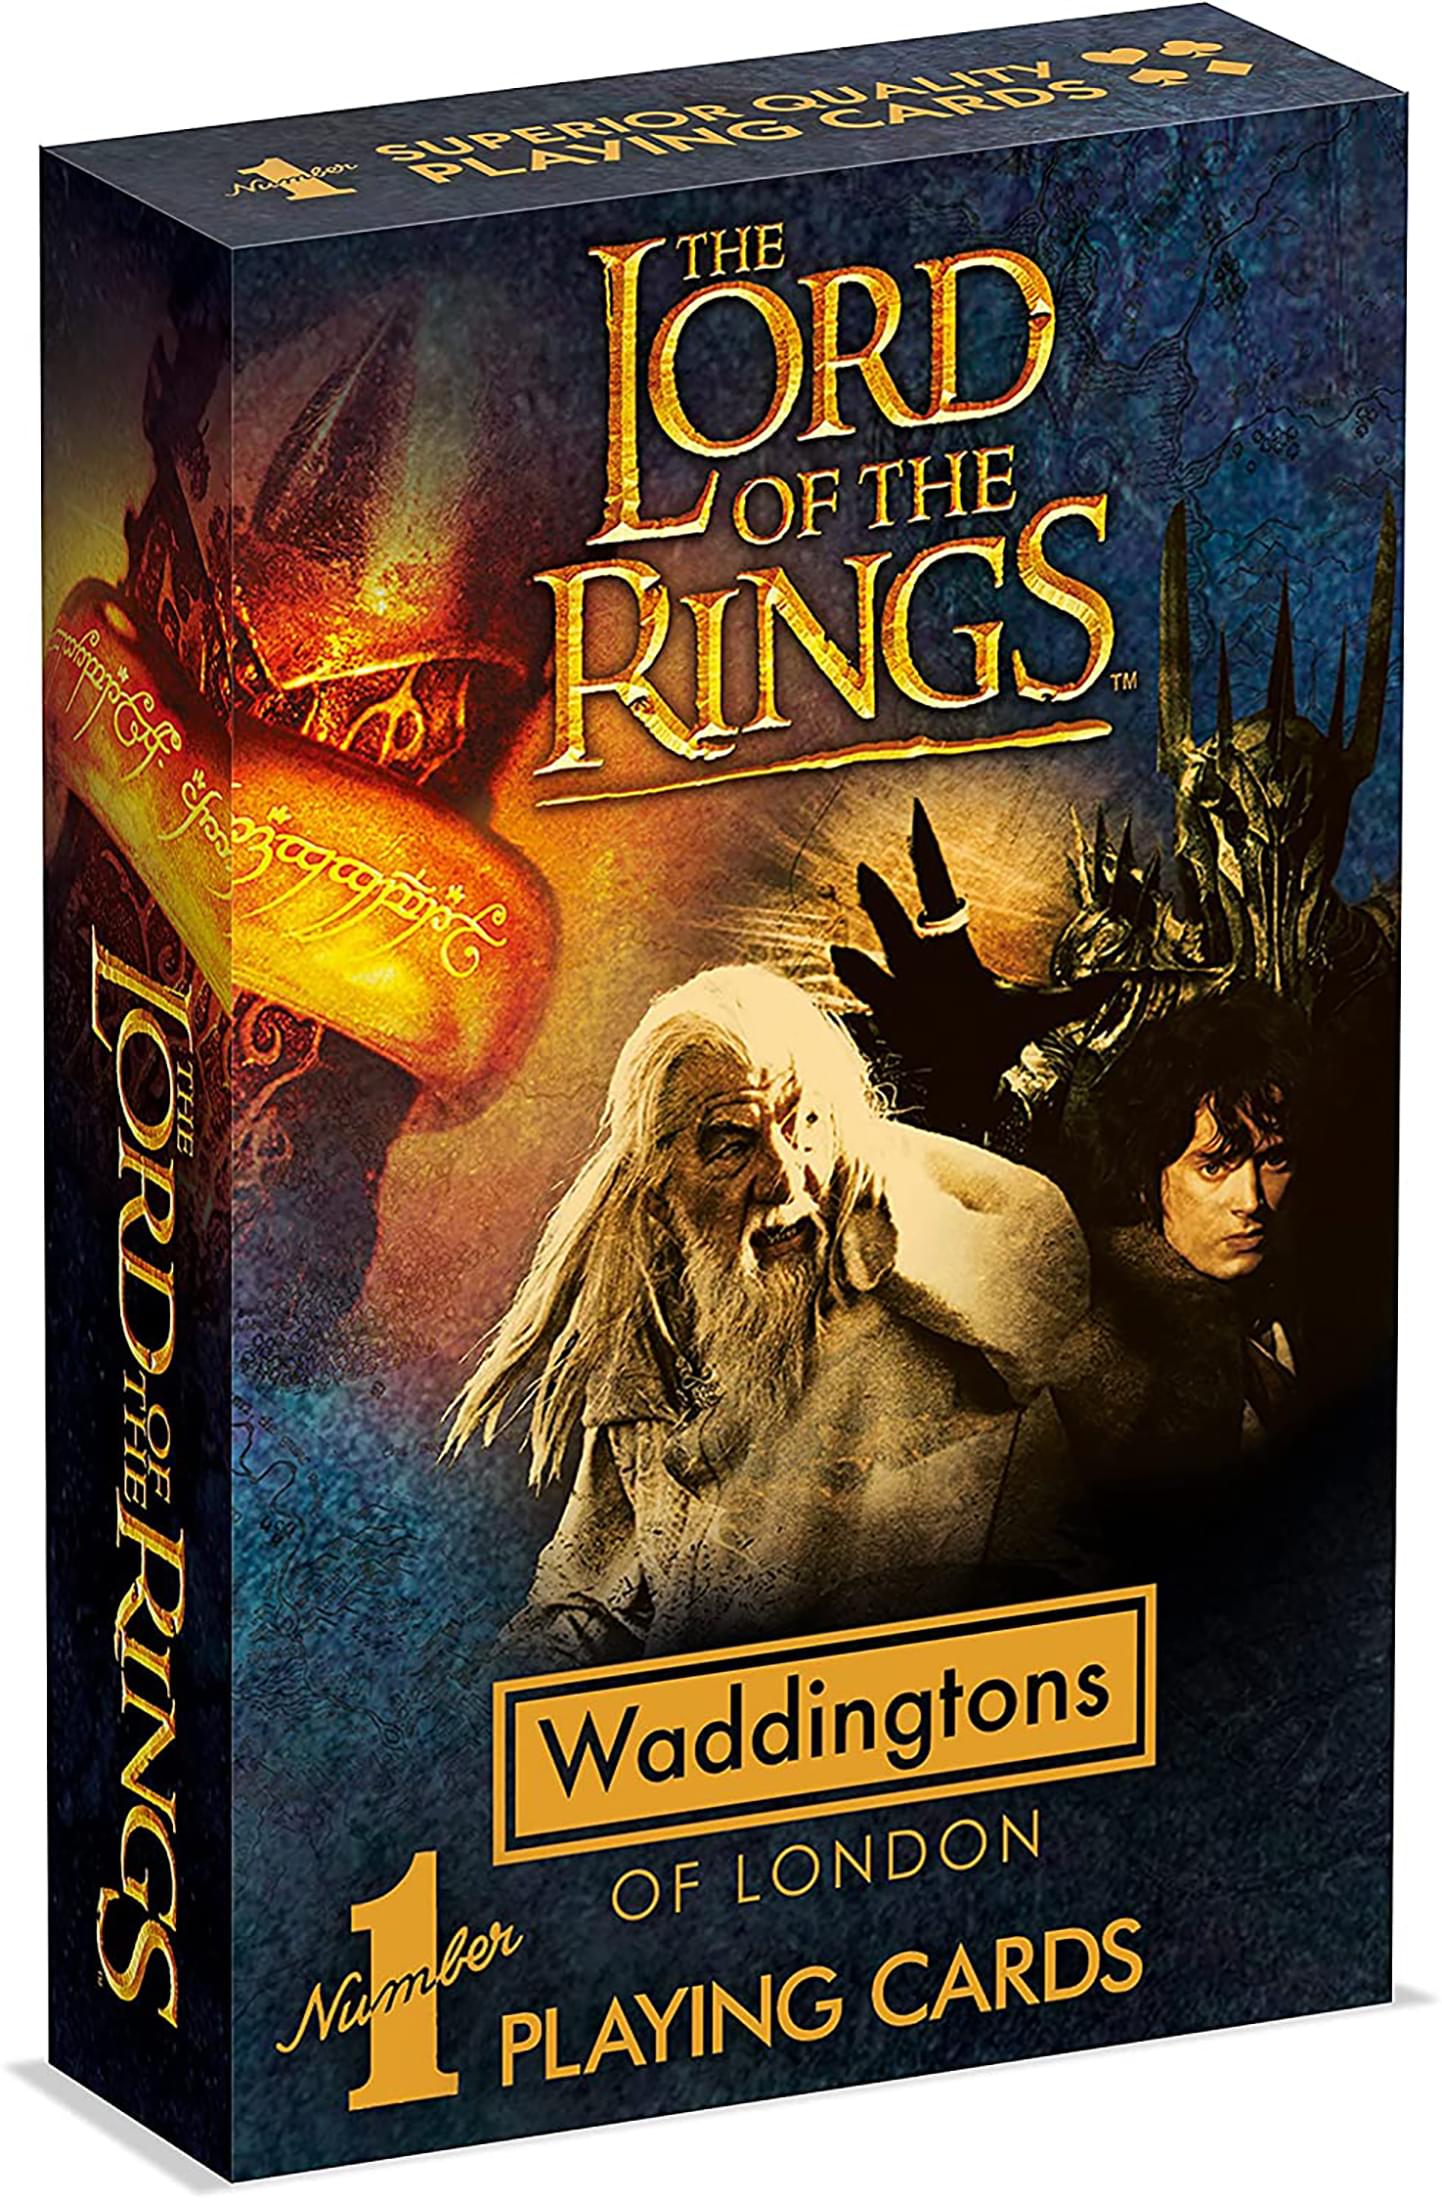 The Lord of the Rings Waddingtons Number 1 Playing Cards